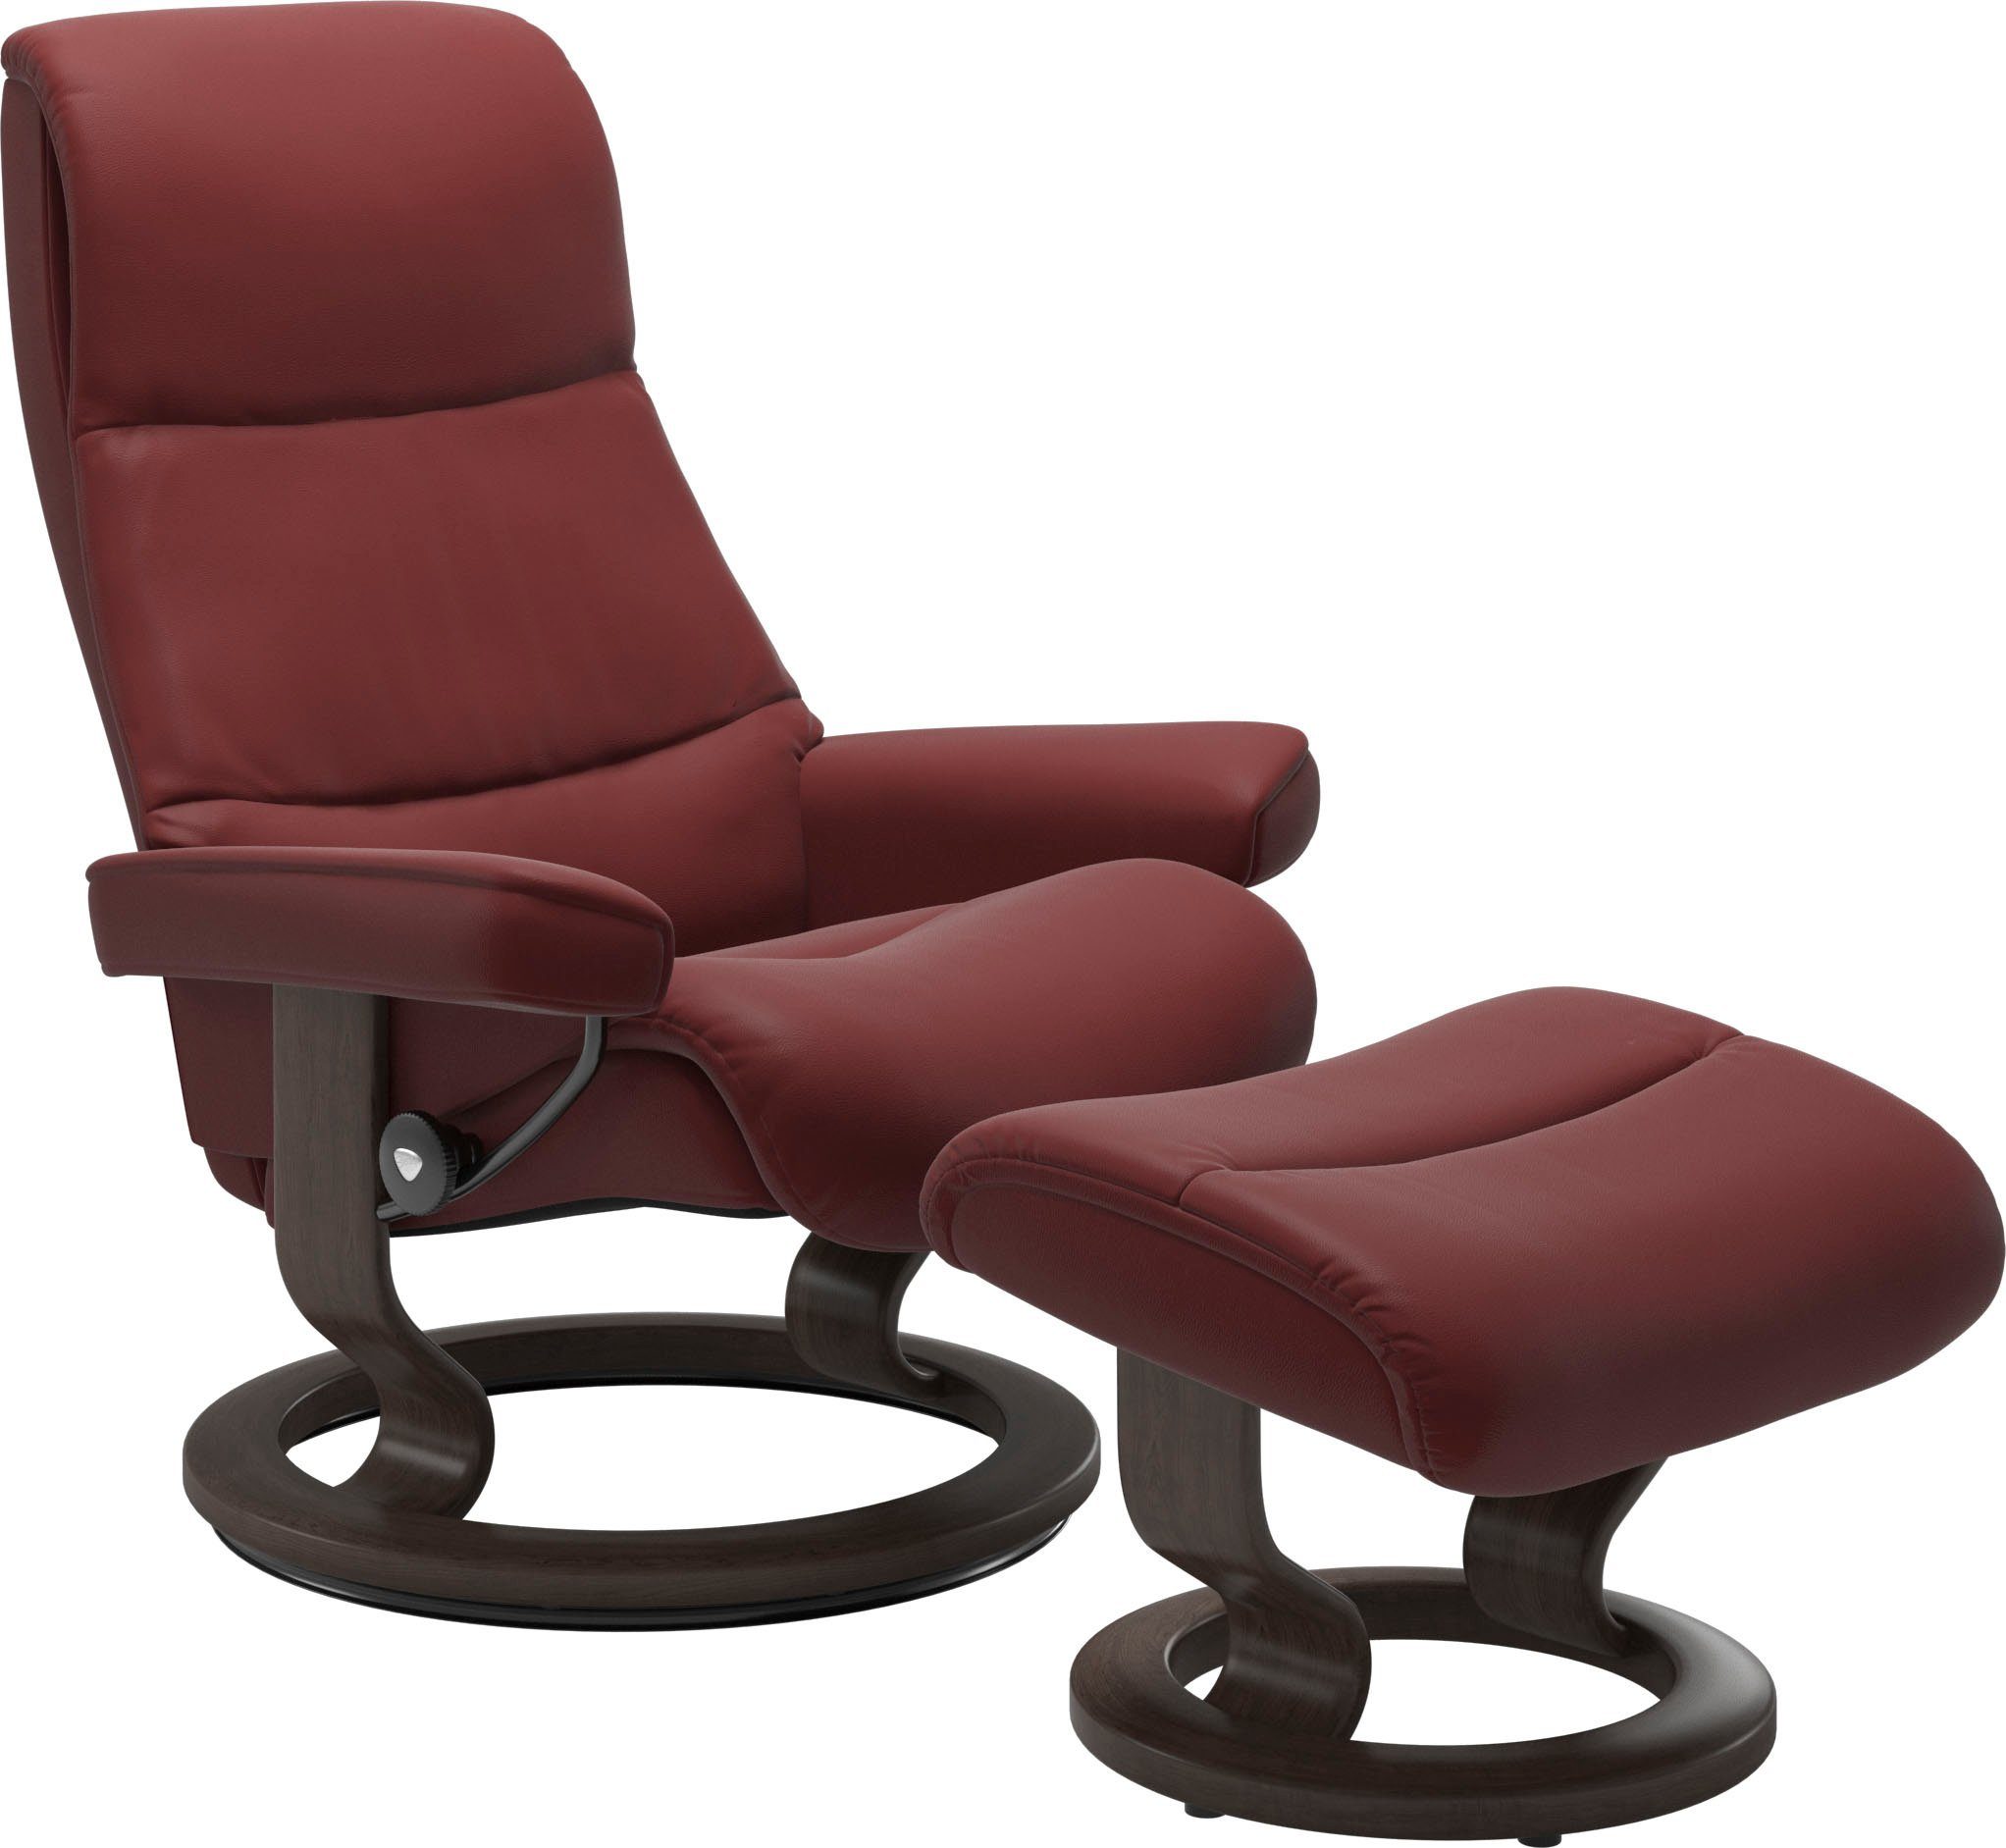 Relaxsessel Base, L,Gestell Stressless® mit Classic Größe View, Wenge